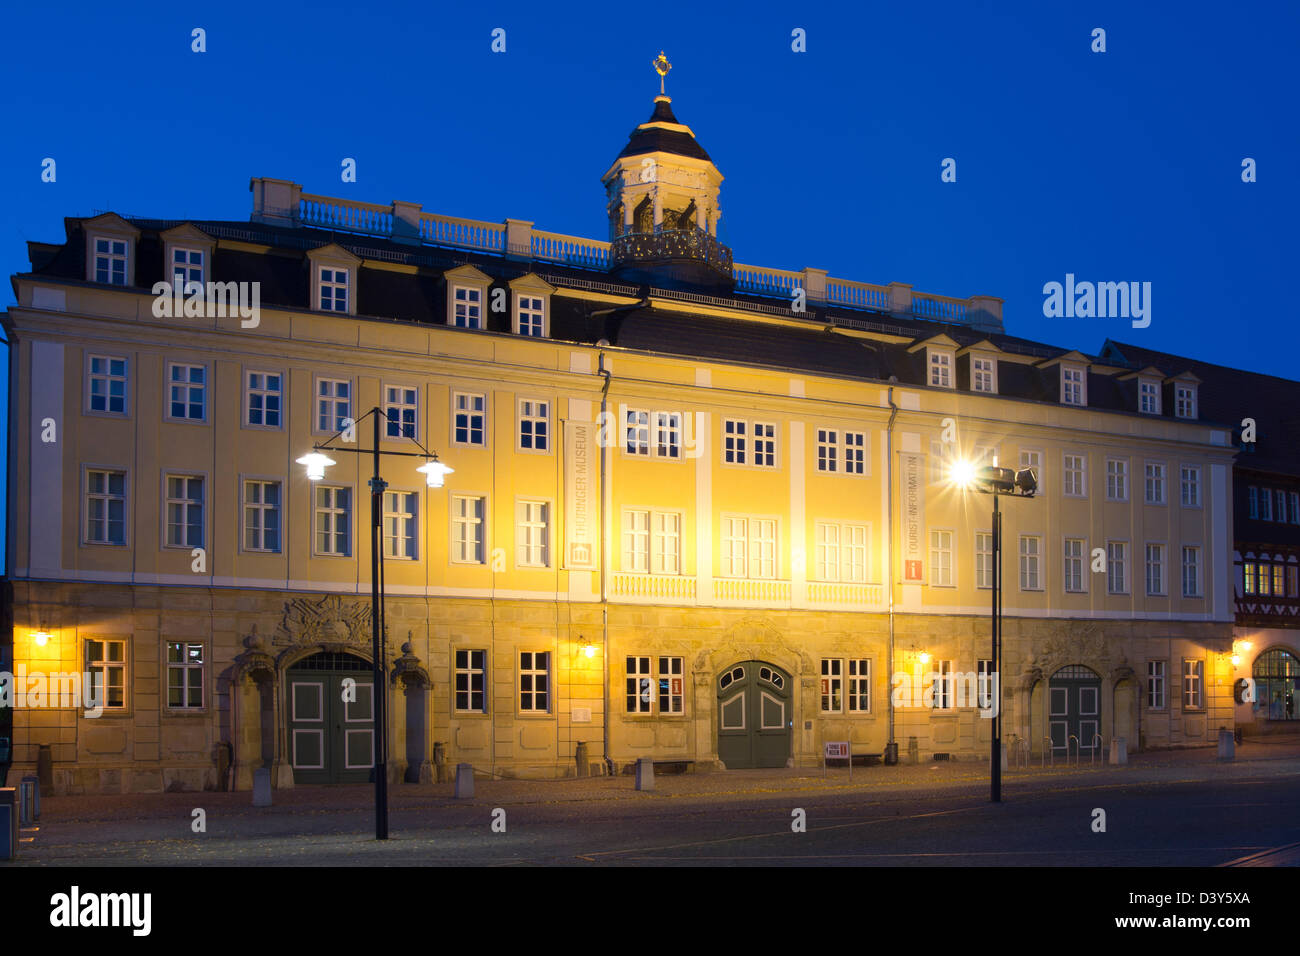 View of the Stadtschloss, town palace in the evening light, Eisenach, Thuringia Germany Europe Stock Photo